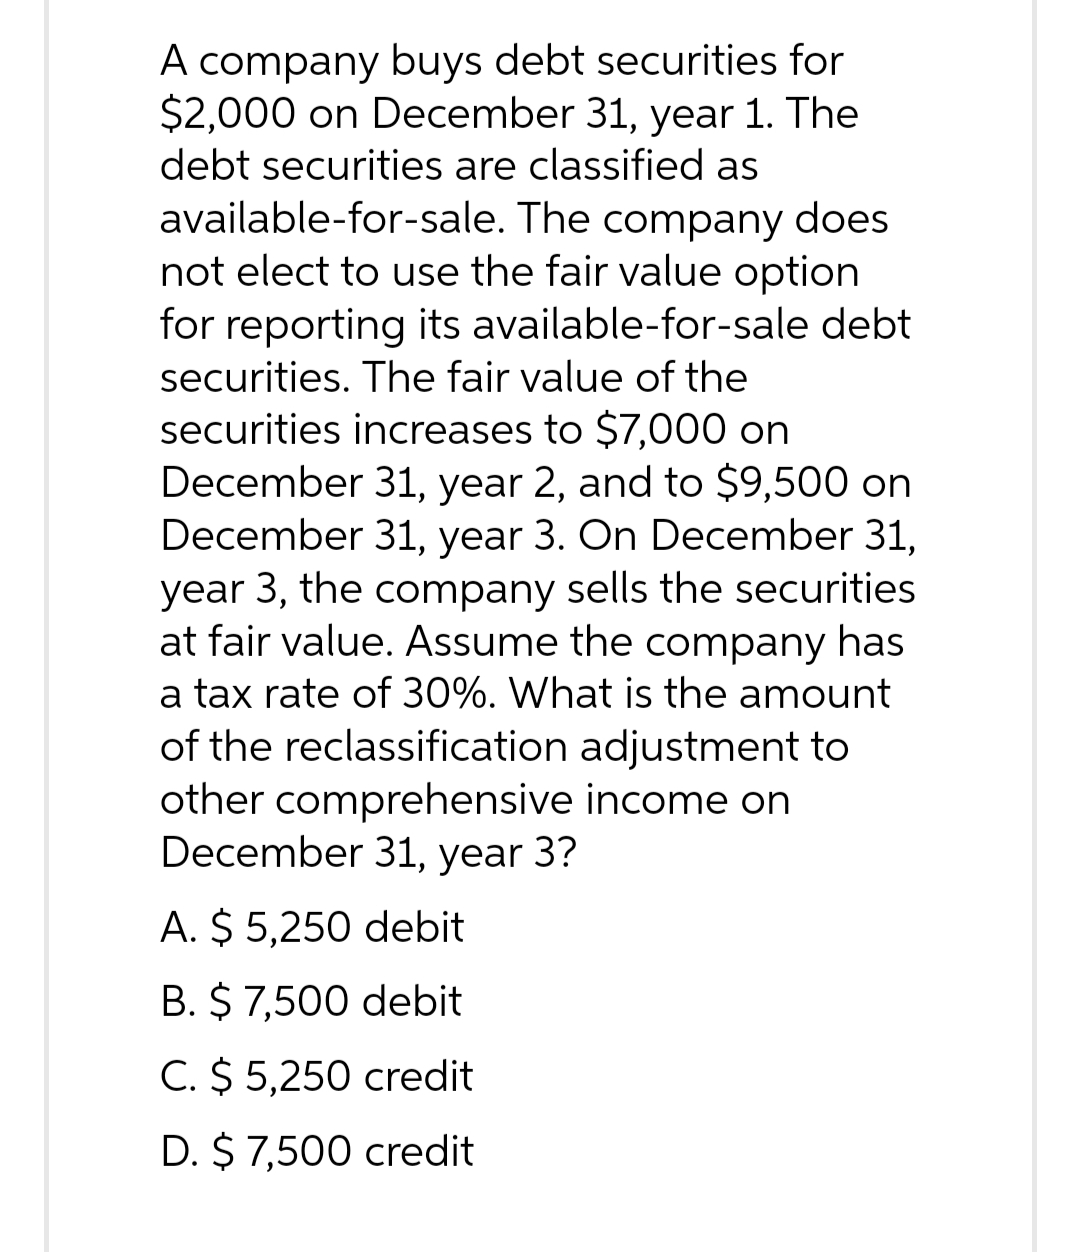 A company buys debt securities for
$2,000 on December 31, year 1. The
debt securities are classified as
available-for-sale. The company does
not elect to use the fair value option
for reporting its available-for-sale debt
securities. The fair value of the
securities increases to $7,000 on
December 31, year 2, and to $9,500 on
December 31, year 3. On December 31,
year 3, the company sells the securities
at fair value. Assume the company has
a tax rate of 30%. What is the amount
of the reclassification adjustment to
other comprehensive income on
December 31, year 3?
A. $5,250 debit
B. $ 7,500 debit
C. $5,250 credit
D. $ 7,500 credit